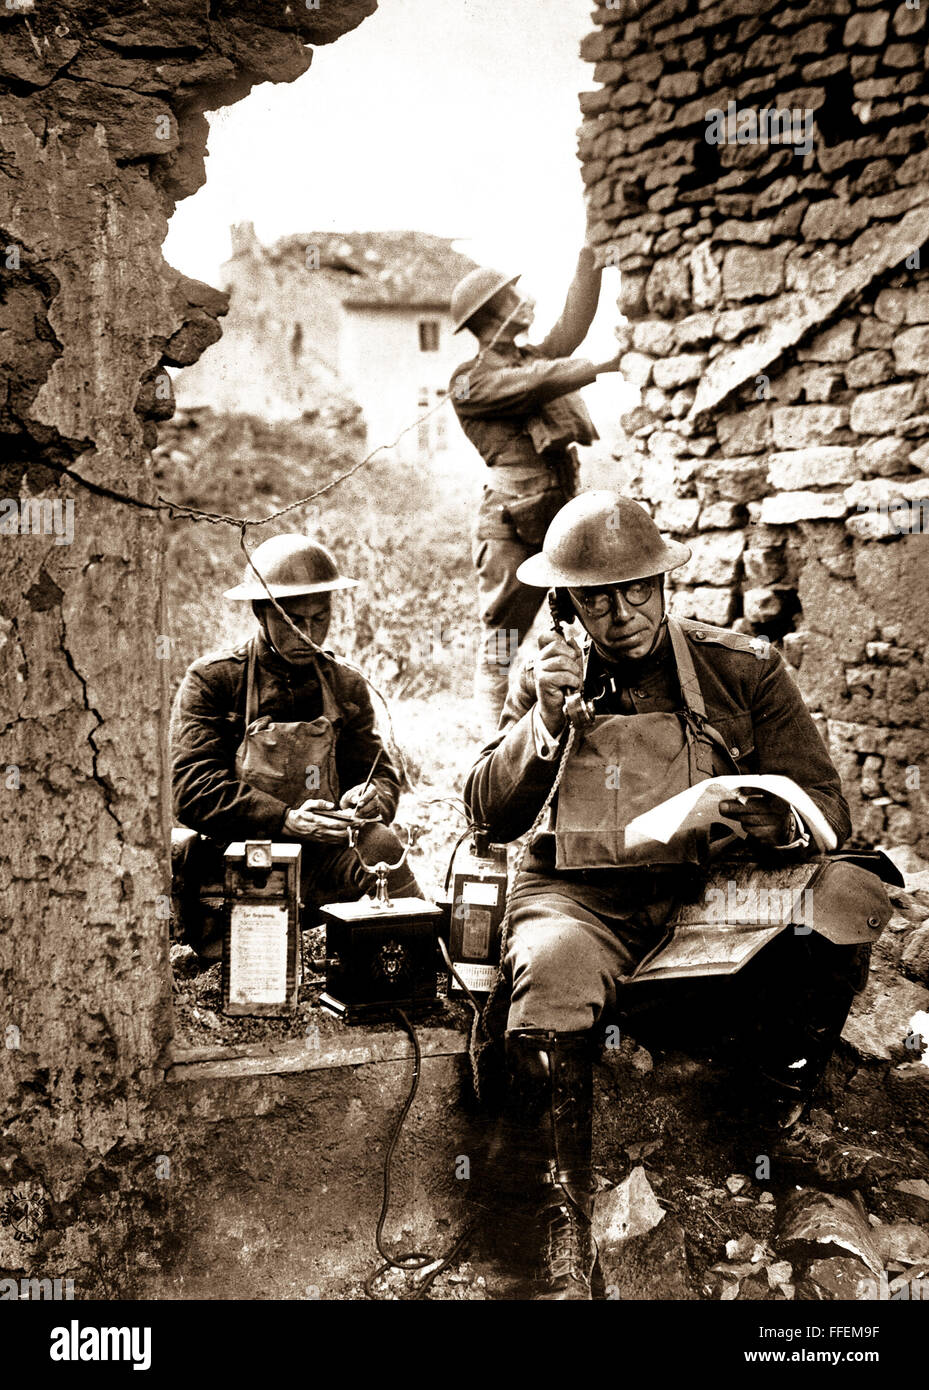 Lt. Col. R. D. Garrett, chief signal officer, 42nd Division, testing a telephone left behind by the Germans in the hasty retreat from the salient of St. Mihiel.  Essey, France.  September 19, 1918.  Cpl. R. H. Ingleston.  (Army) Stock Photo